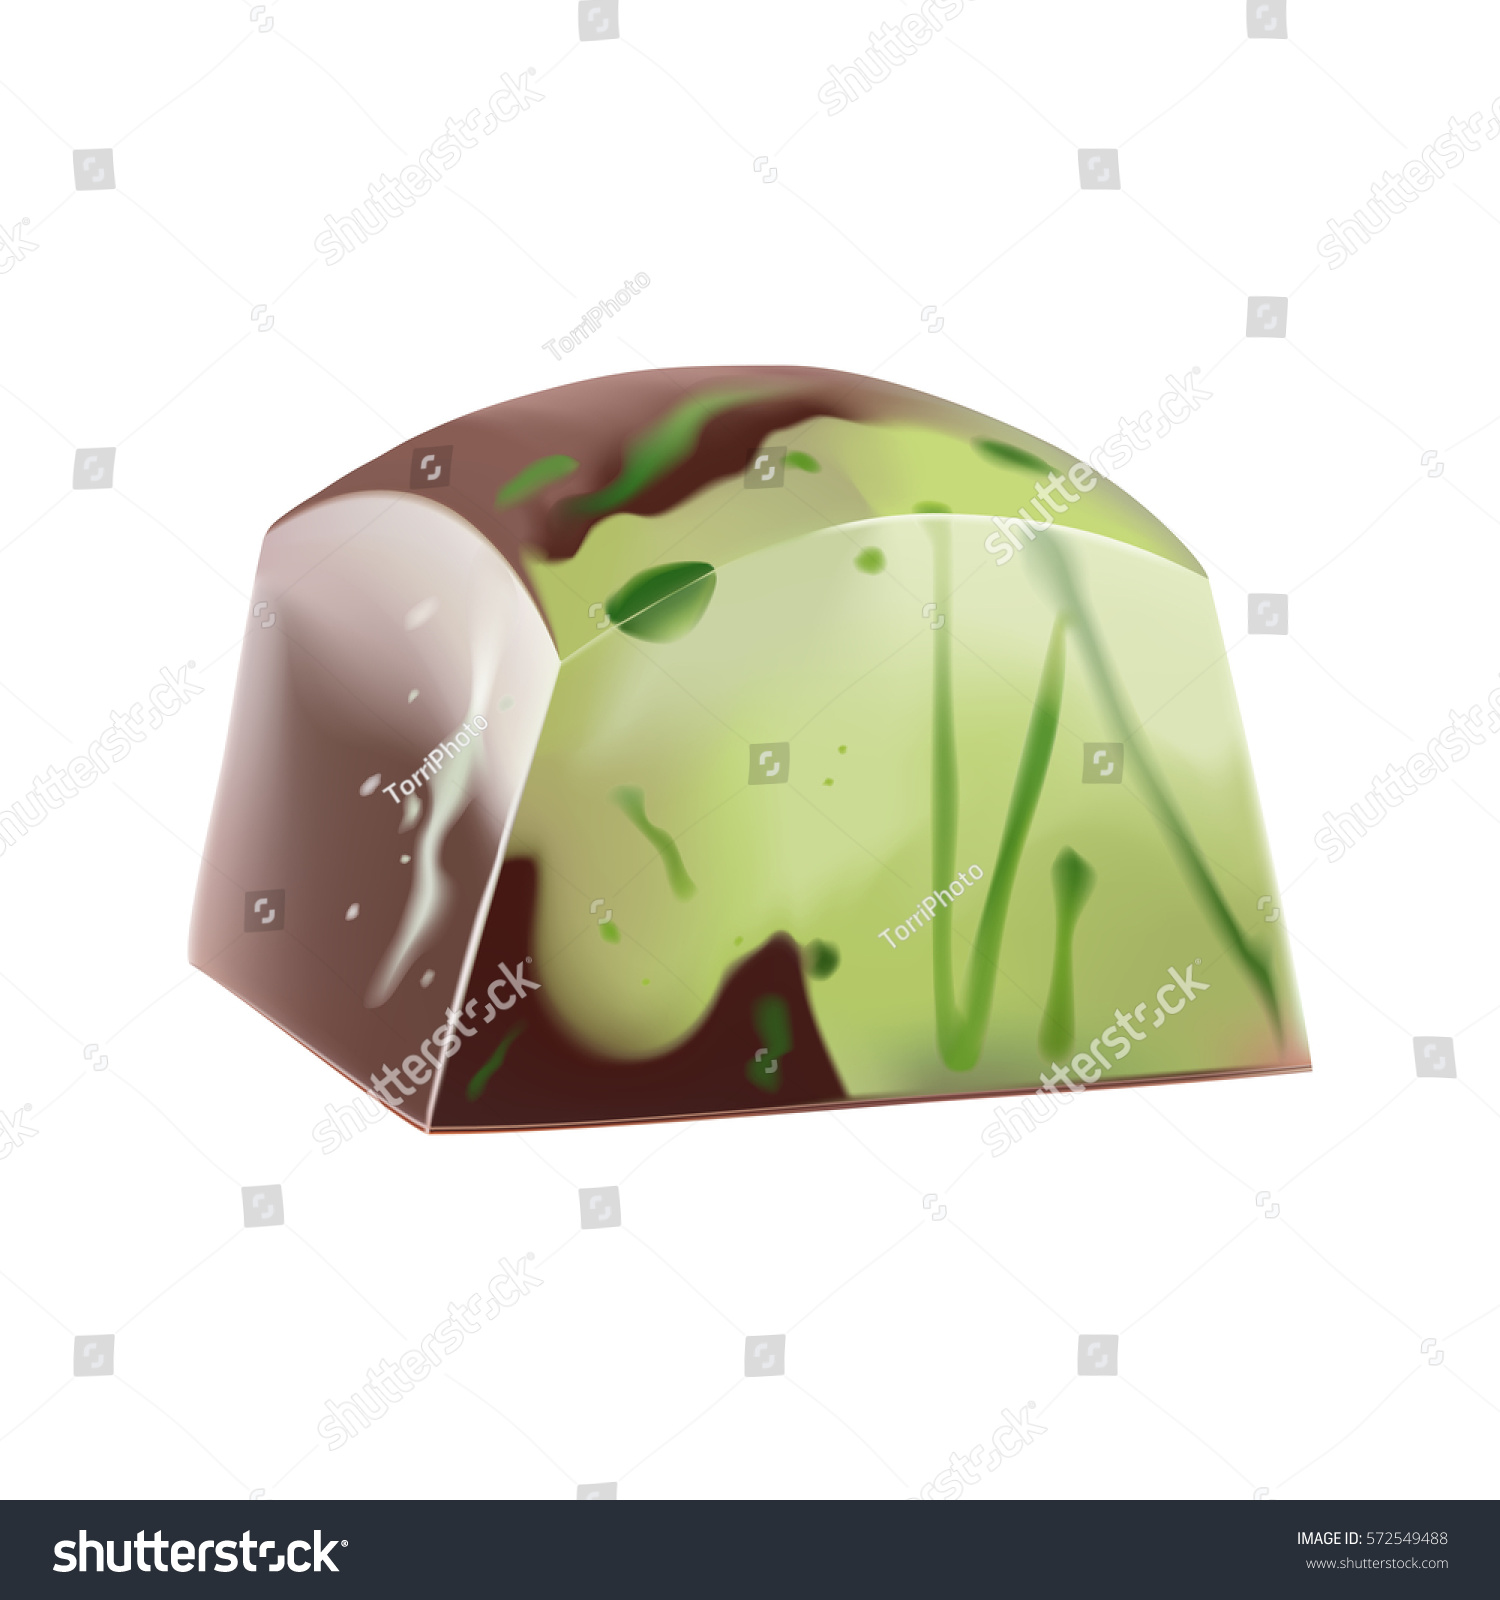 https://www.shutterstock.com/image-vector/painted-pistachio-chocolate-candy-green-splashes-572549488